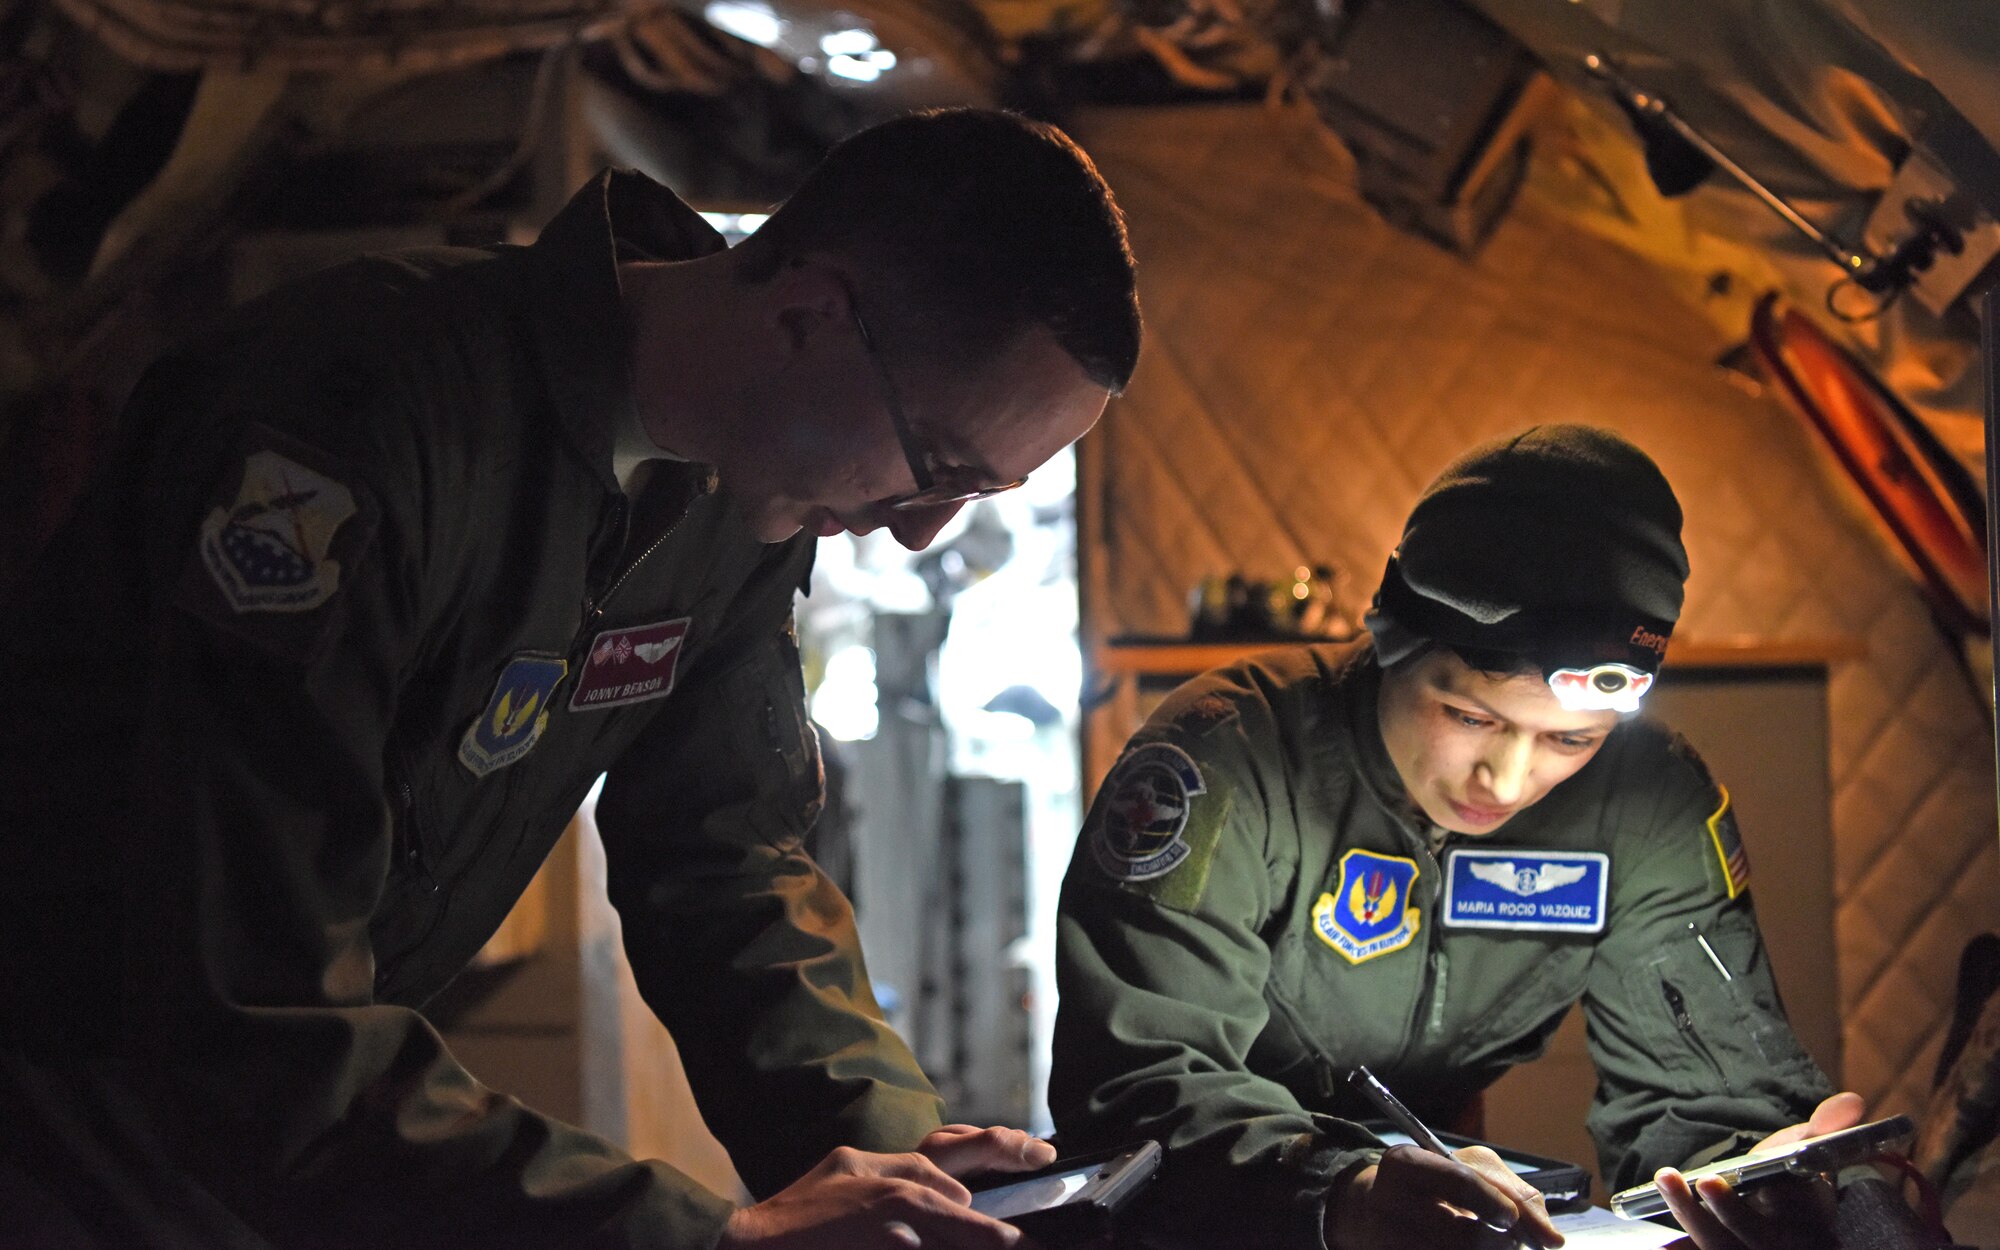 U.S. Air Force Capt. Jonny Benson, 351st Air Refueling Squadron KC-135 Stratotanker aircraft commander from RAF Mildenhall, England, and U.S. Air Force Maj. Maria Rocio Vazquez, 86th Aeromedical Evacuation Squadron medical crew director from Ramstein Air Base, Germany, discuss pre-flight checklists prior to aeromedical evacuation training over the skies of Germany, Jan. 23, 2019. During the training, members underwent emergency medical scenarios, including patients suffering worsening health conditions, cardiac emergencies, aircraft decompression and emergency ditching of aircraft. (U.S. Air Force photo by Airman 1st Class Brandon Esau)